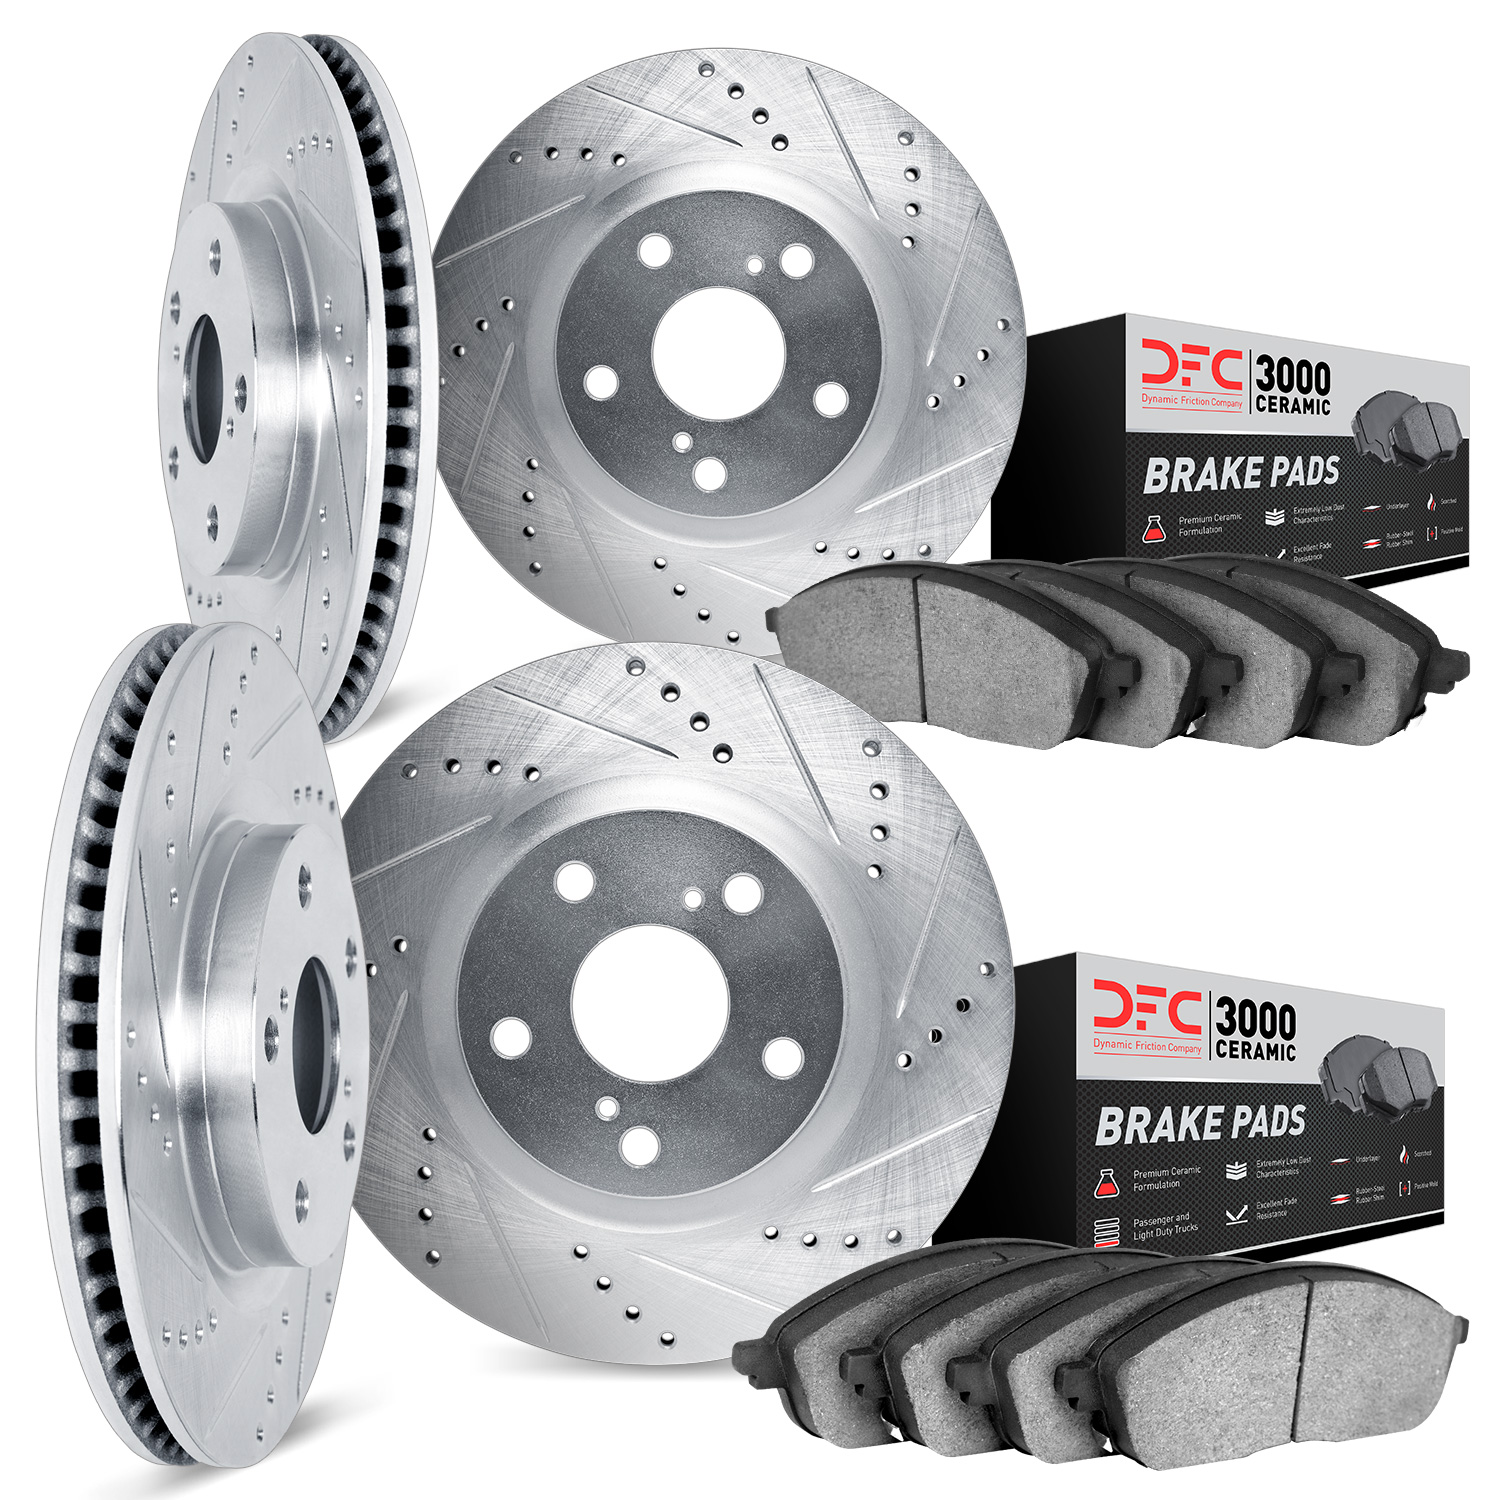 7304-67047 Drilled/Slotted Brake Rotor with 3000-Series Ceramic Brake Pads Kit [Silver], 2005-2020 Infiniti/Nissan, Position: Fr